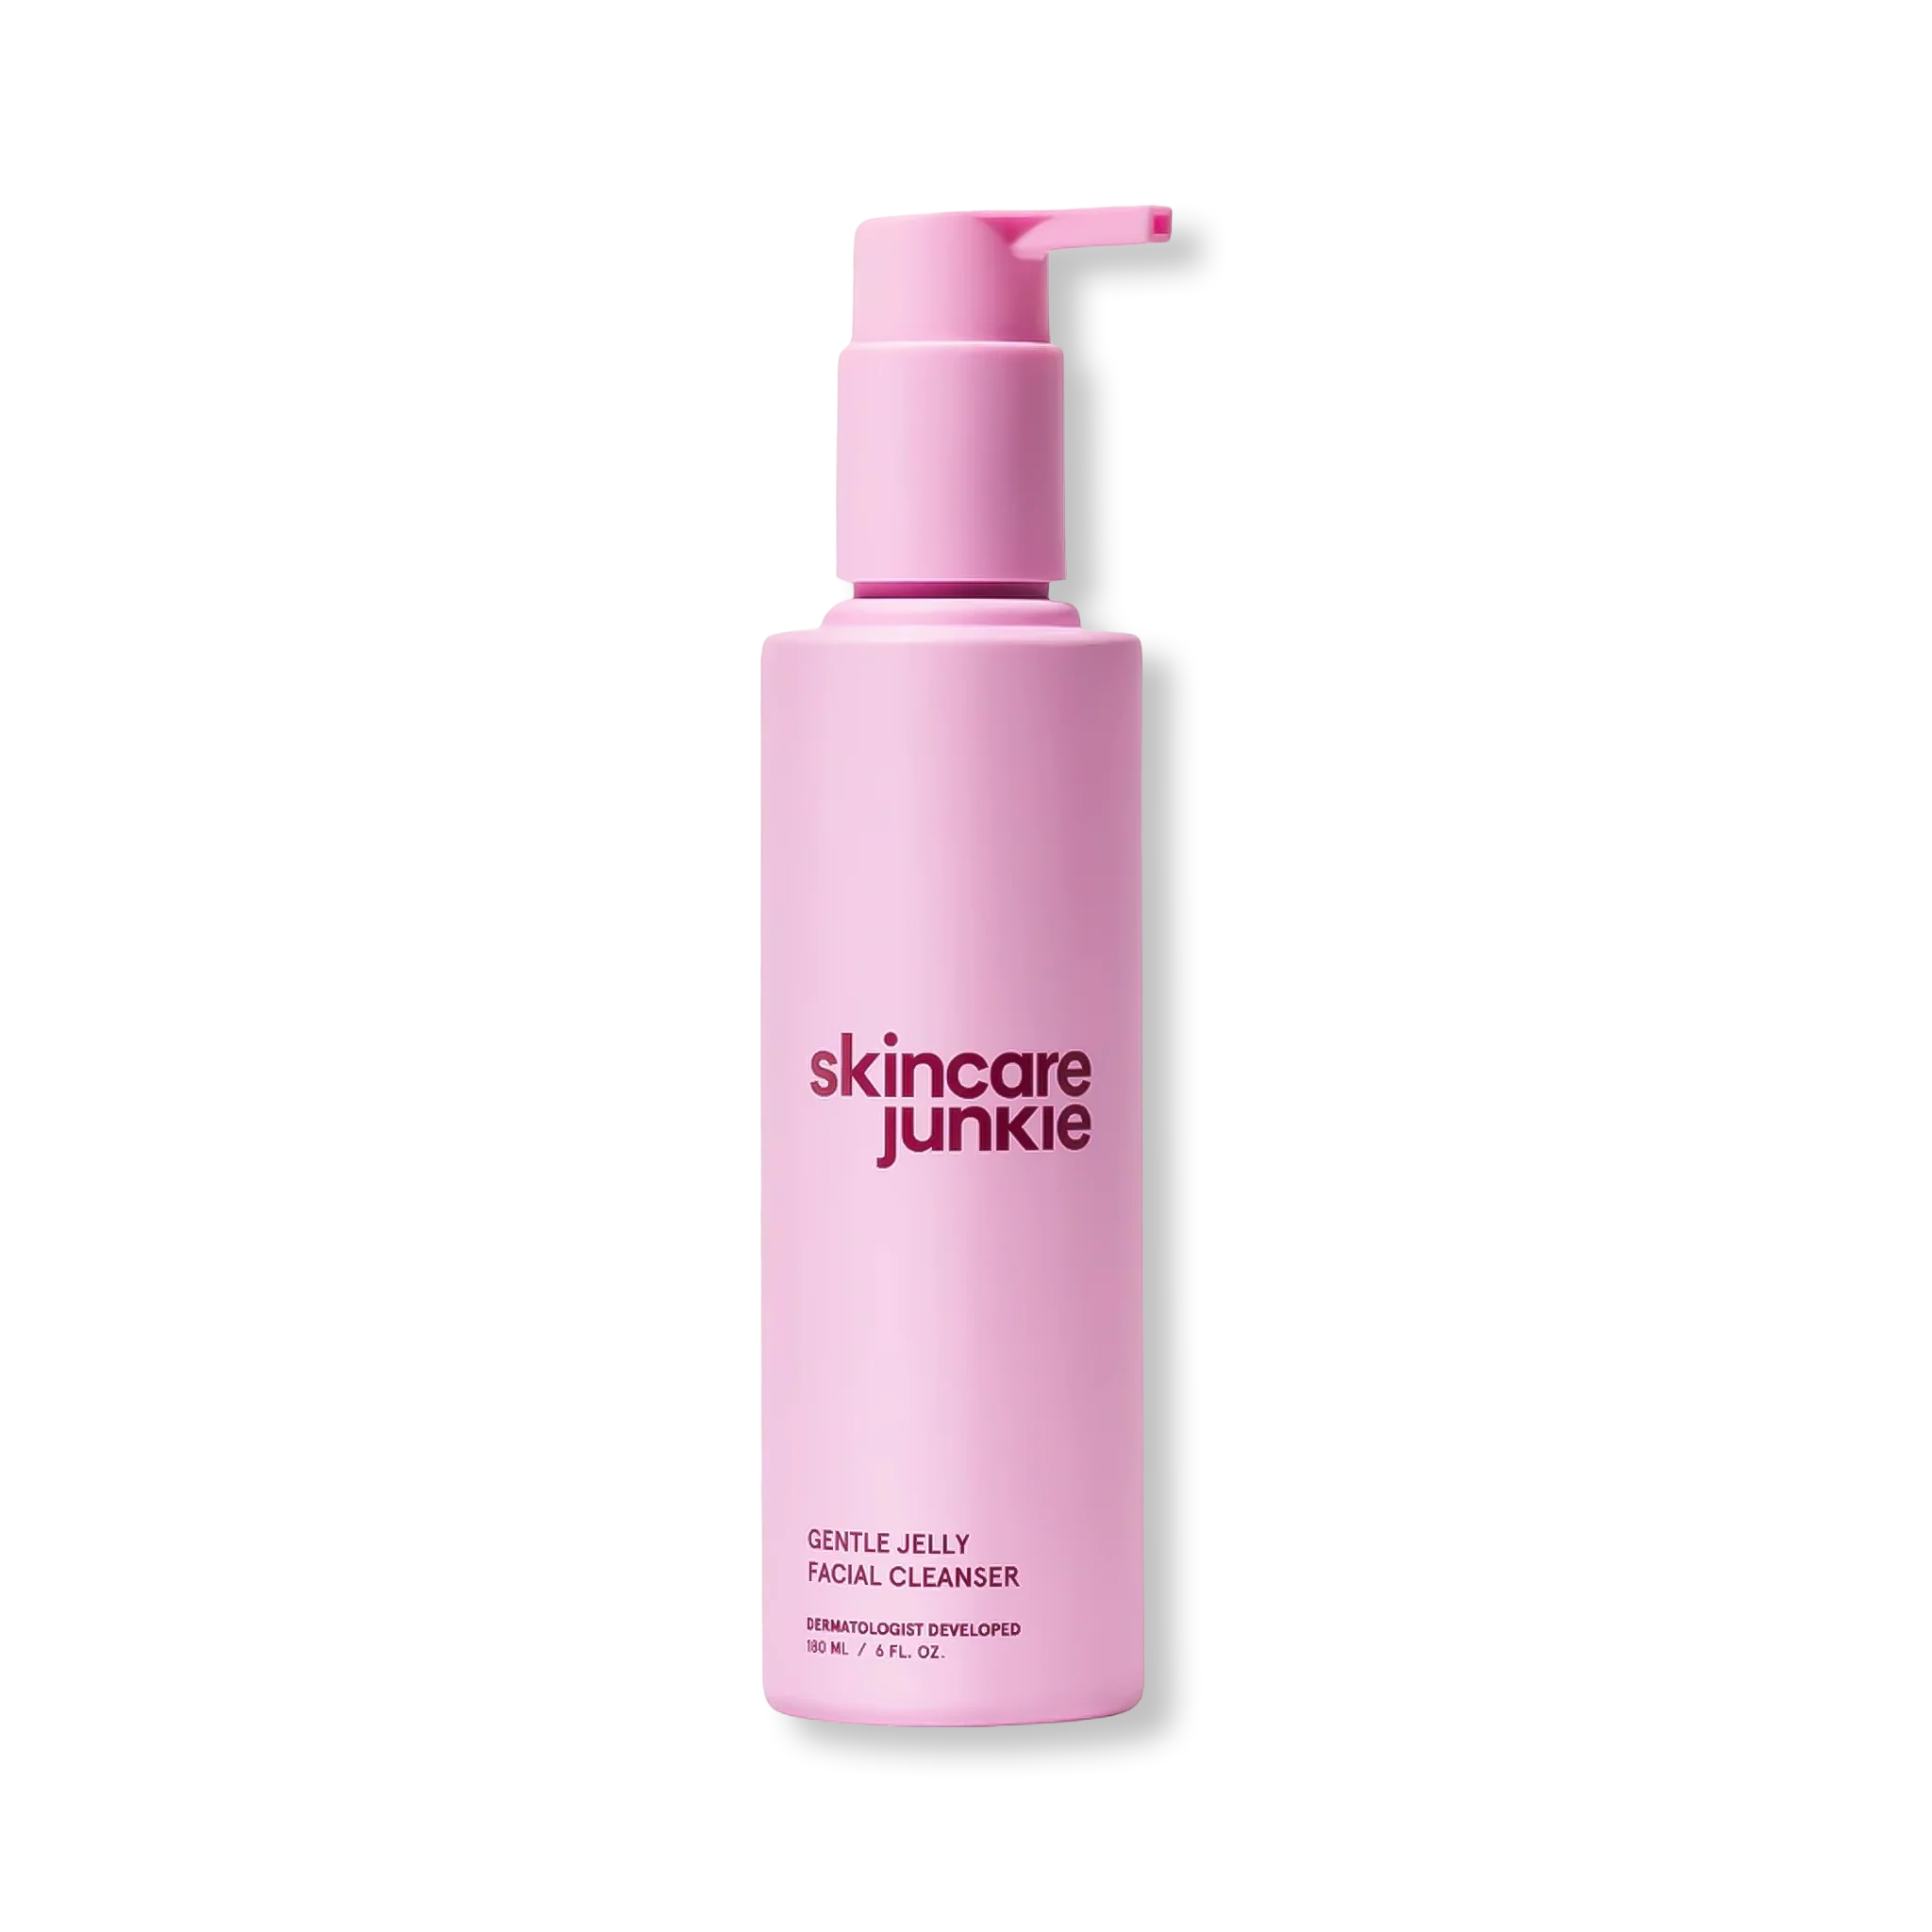 Skincare Junkie Gentle Jelly Facial Cleanser